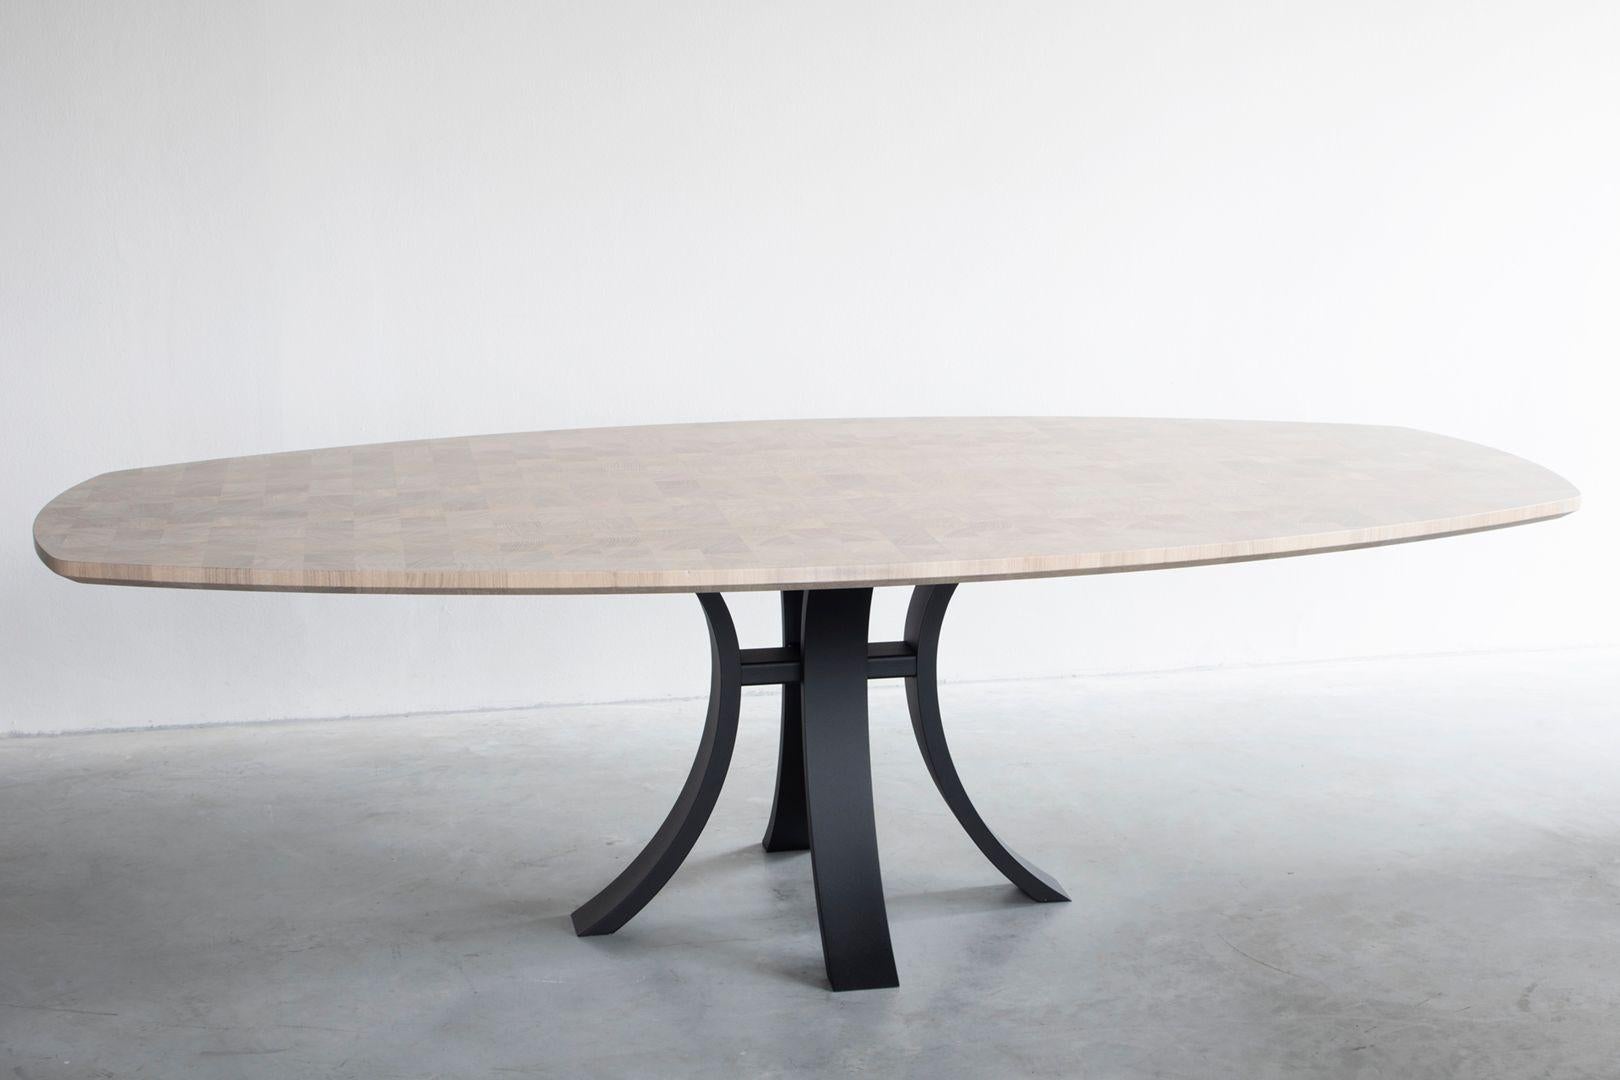 Kops slim dining table semi-oval by Van Rossum
Dimensions: D252 x W126 x H75 cm
Materials: Oak, Steel.
Also available in walnut.

The wood is available in all standard Van Rossum colors, or in a matching finish to customer’s own sample.
The